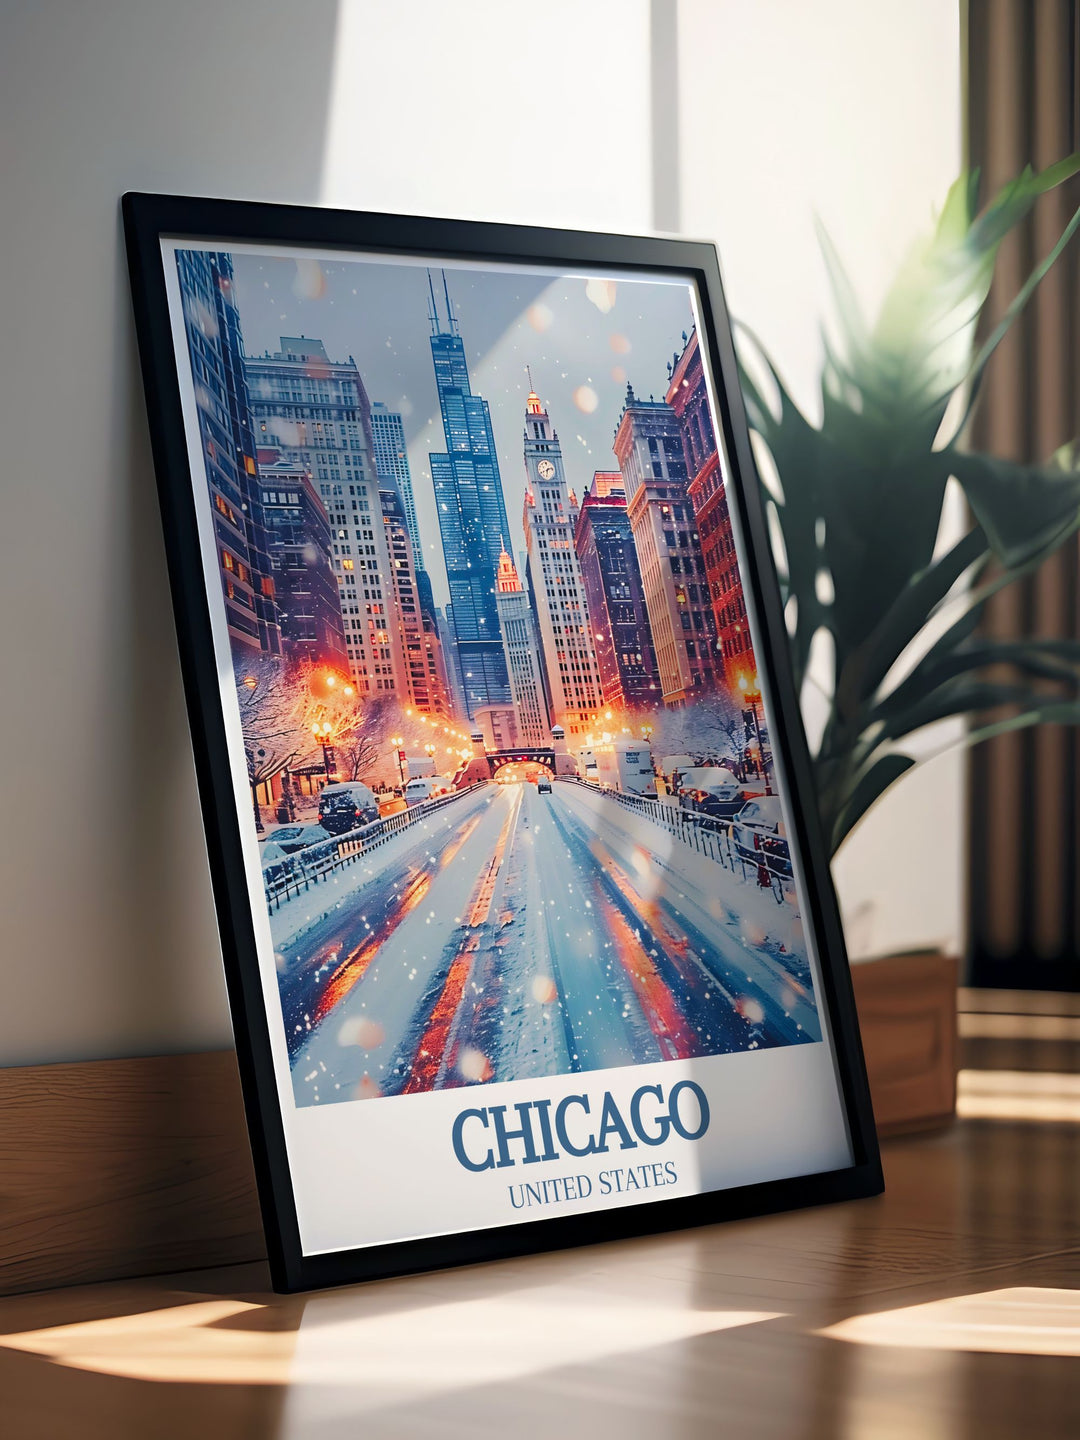 Showcasing the striking architecture of Michigan Avenue, this poster adds a unique touch of Chicagos urban beauty to your decor. Experience the vibrant allure of the Magnificent Mile with this art print, highlighting the citys rich history and modern elegance.